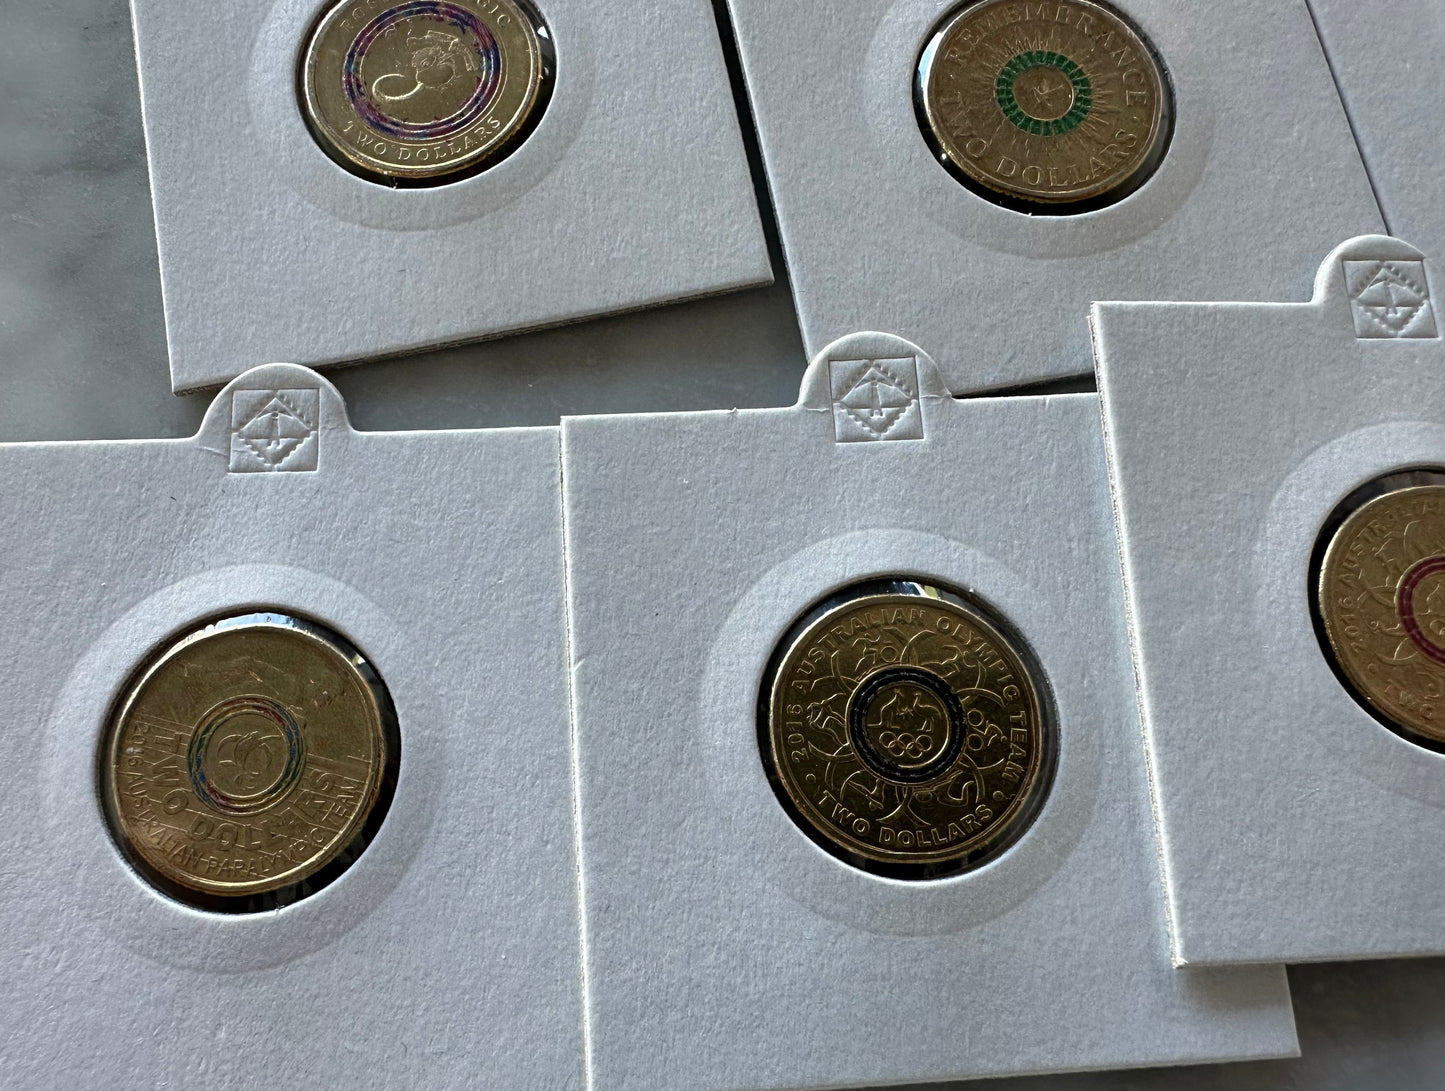 $2 Coin Collectors Starter Kit incl 35 coins and a collectors folder